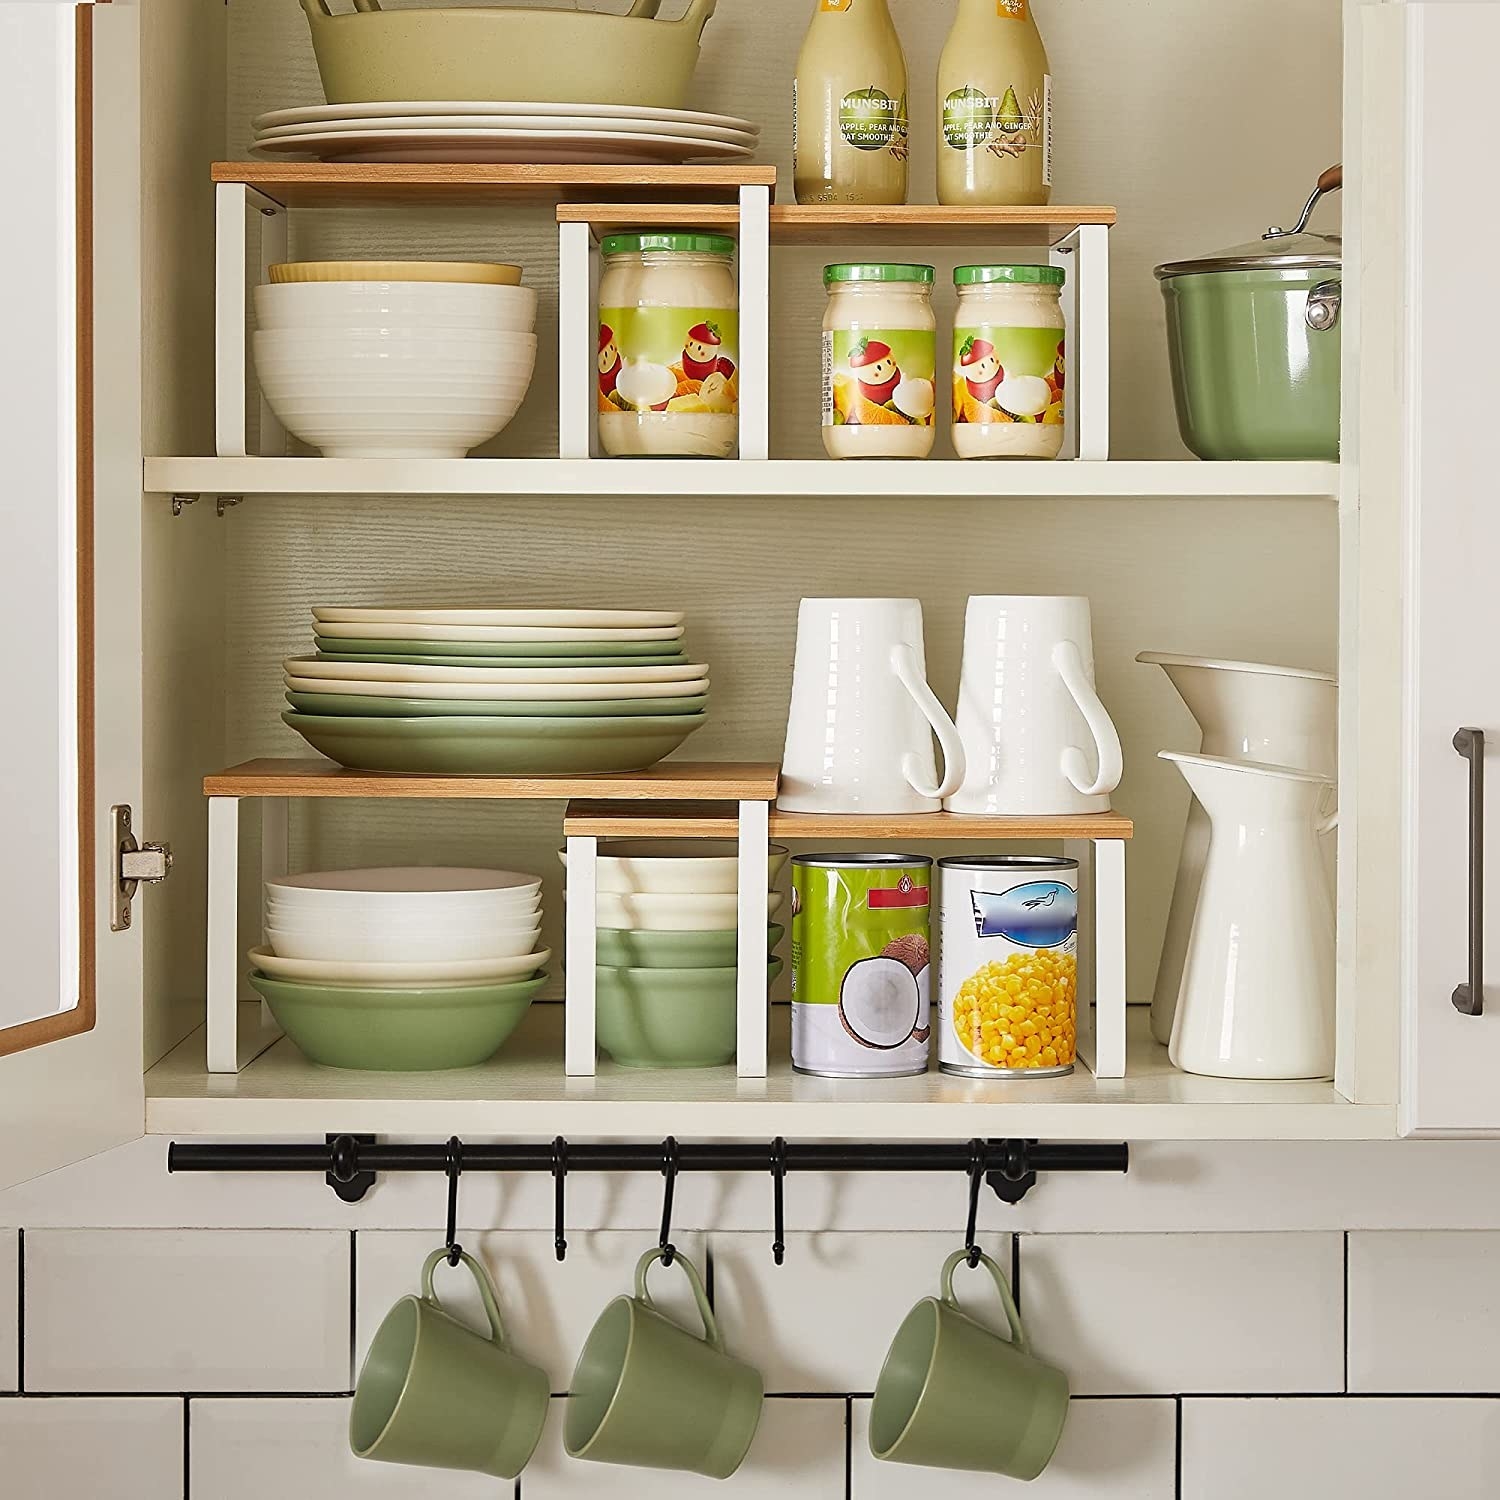 25 Storage Solutions For Kitchens Screaming “Help”